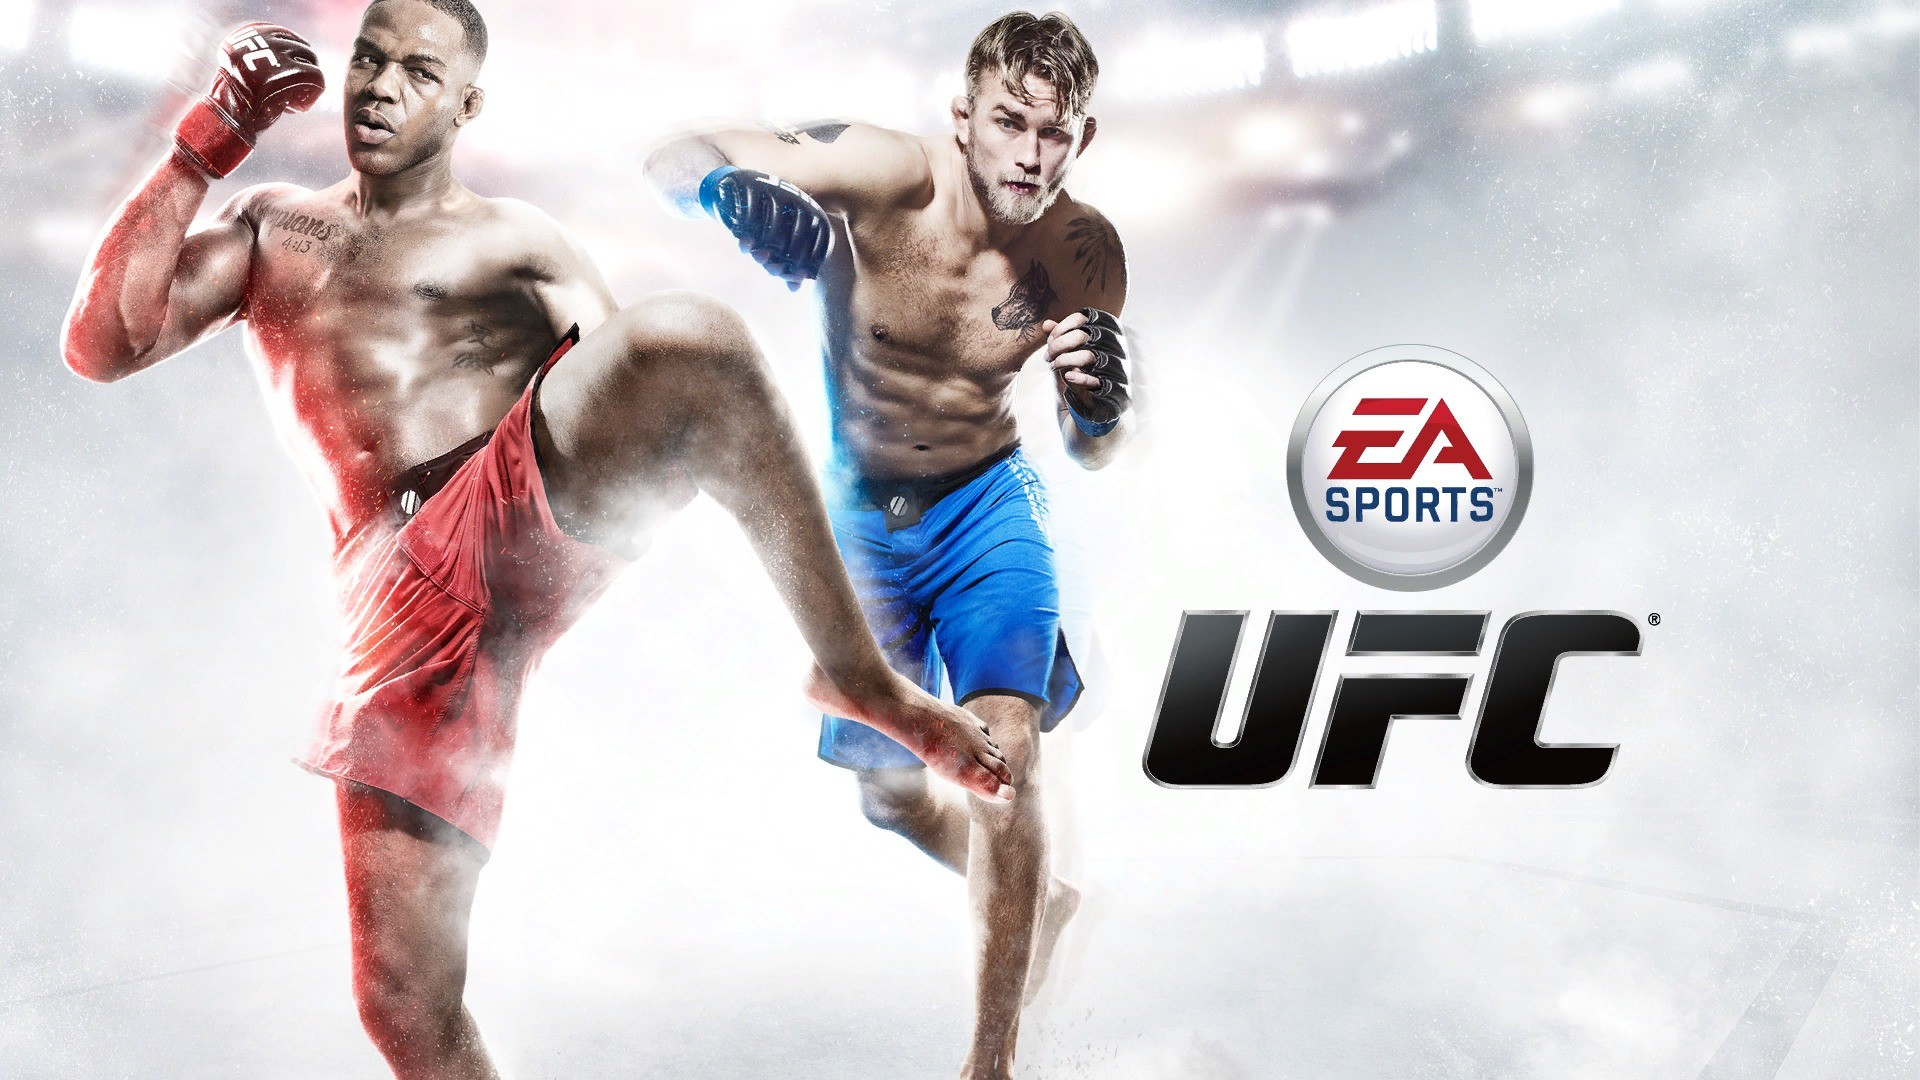 1920x1080 1280x1024 EA Sports UFC 1280x1024 Resolution HD 4k Wallpapers, Images, Backgrounds, Photos and Pictures